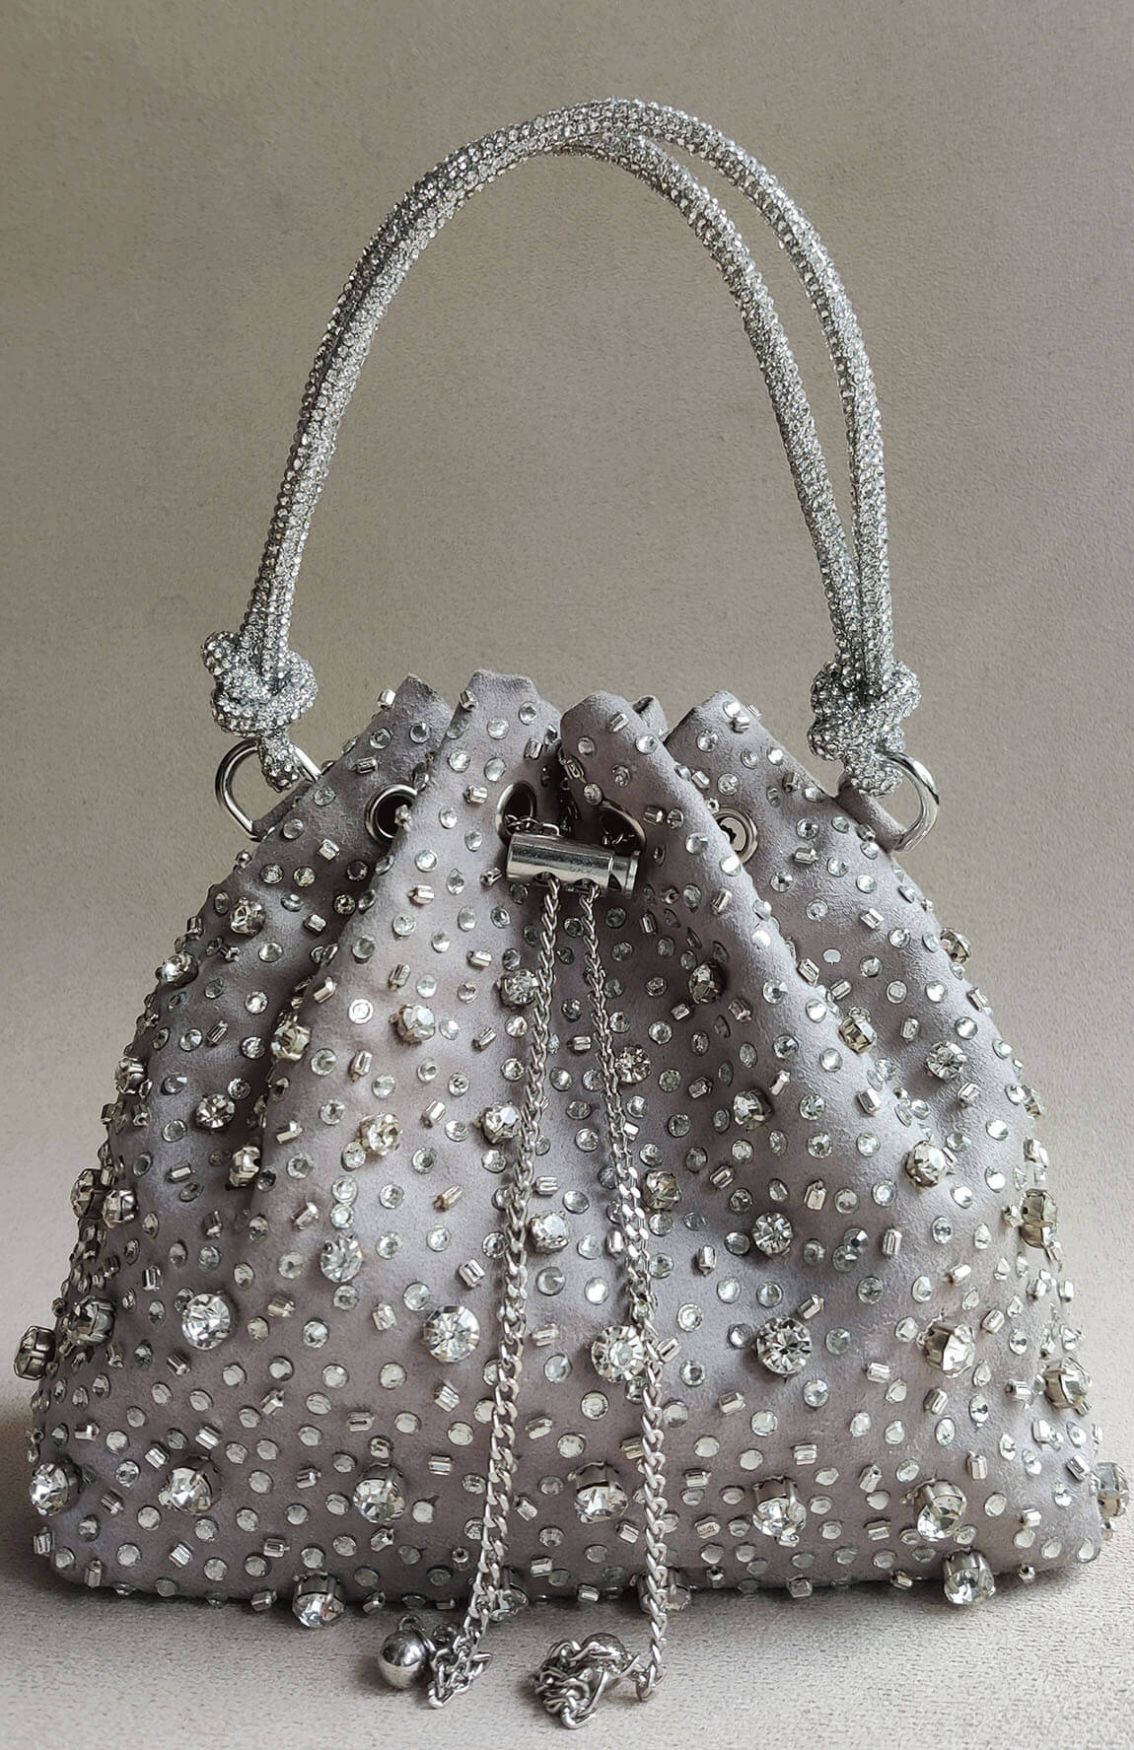 The Starry Bucket Bag In Silver Grey